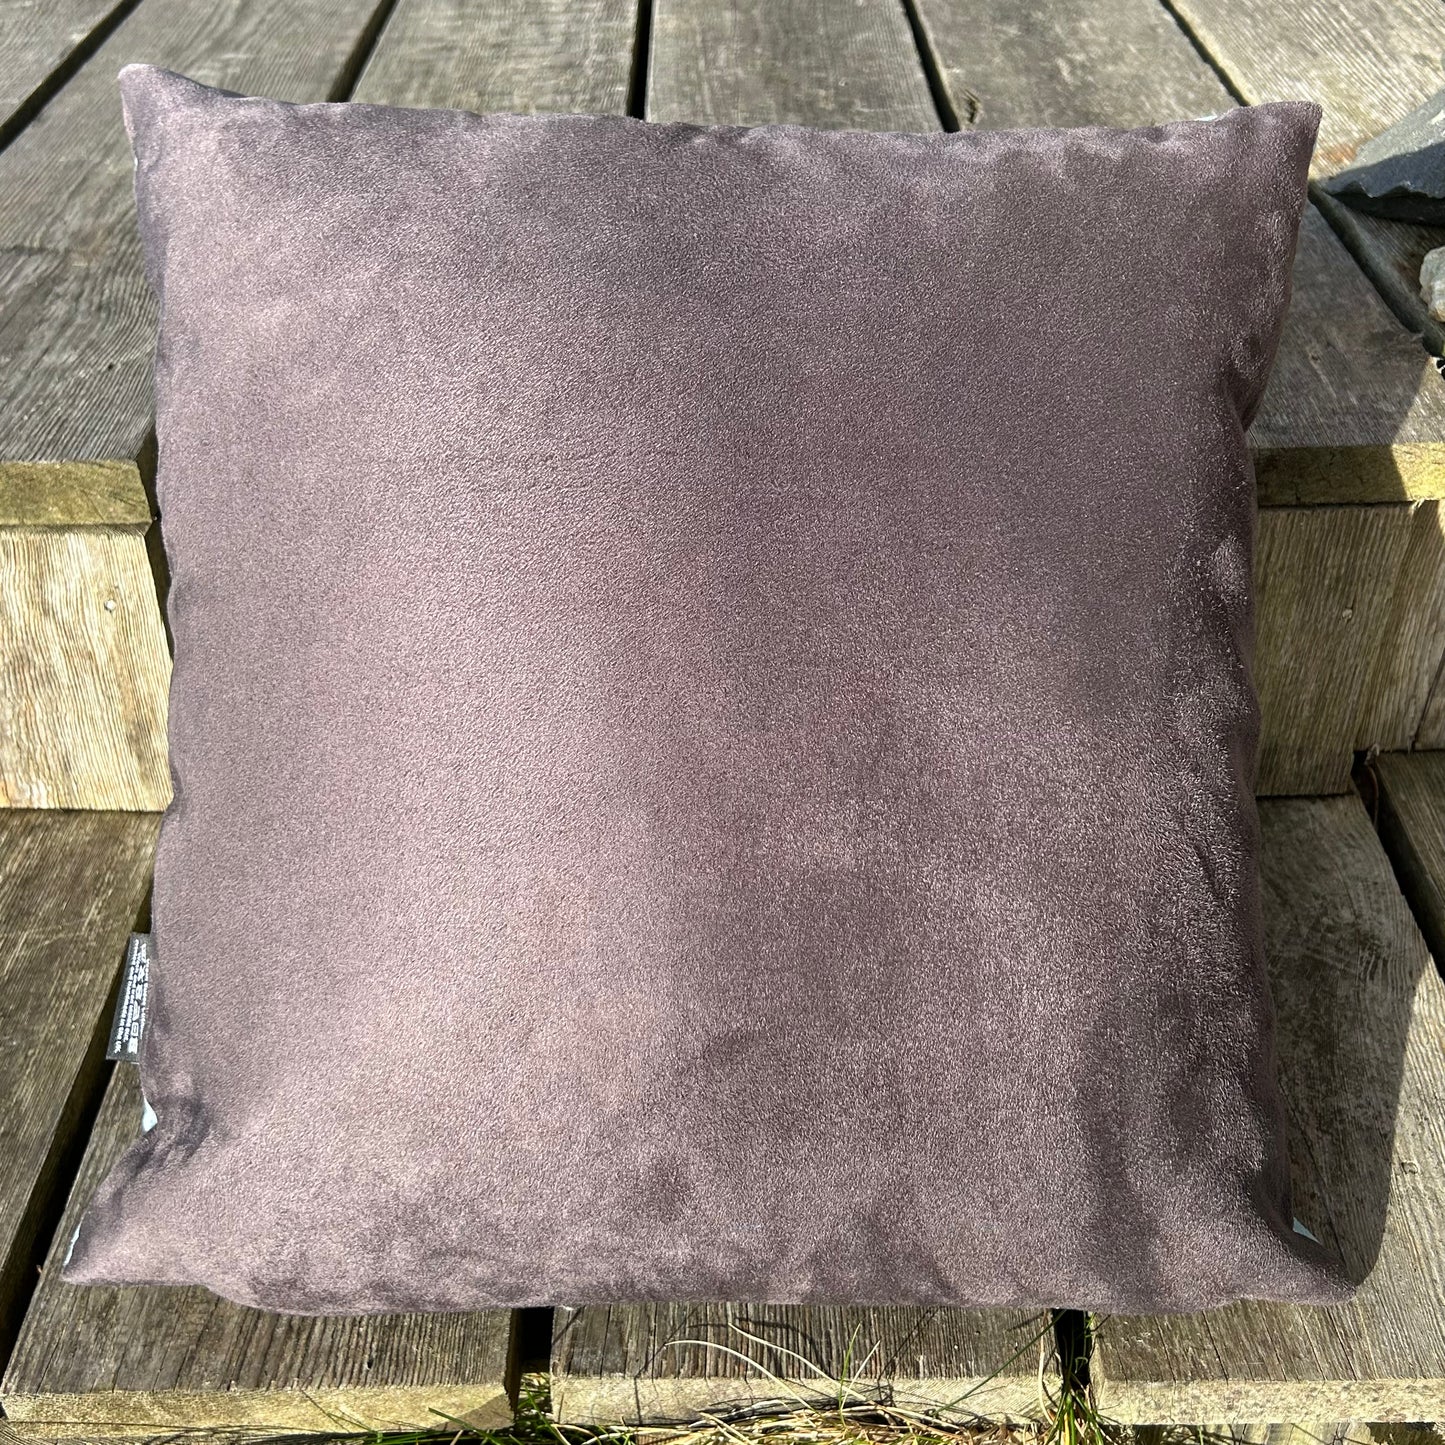 Wildflowers of Islay Faux Suede Cushion Cover - Duck Egg